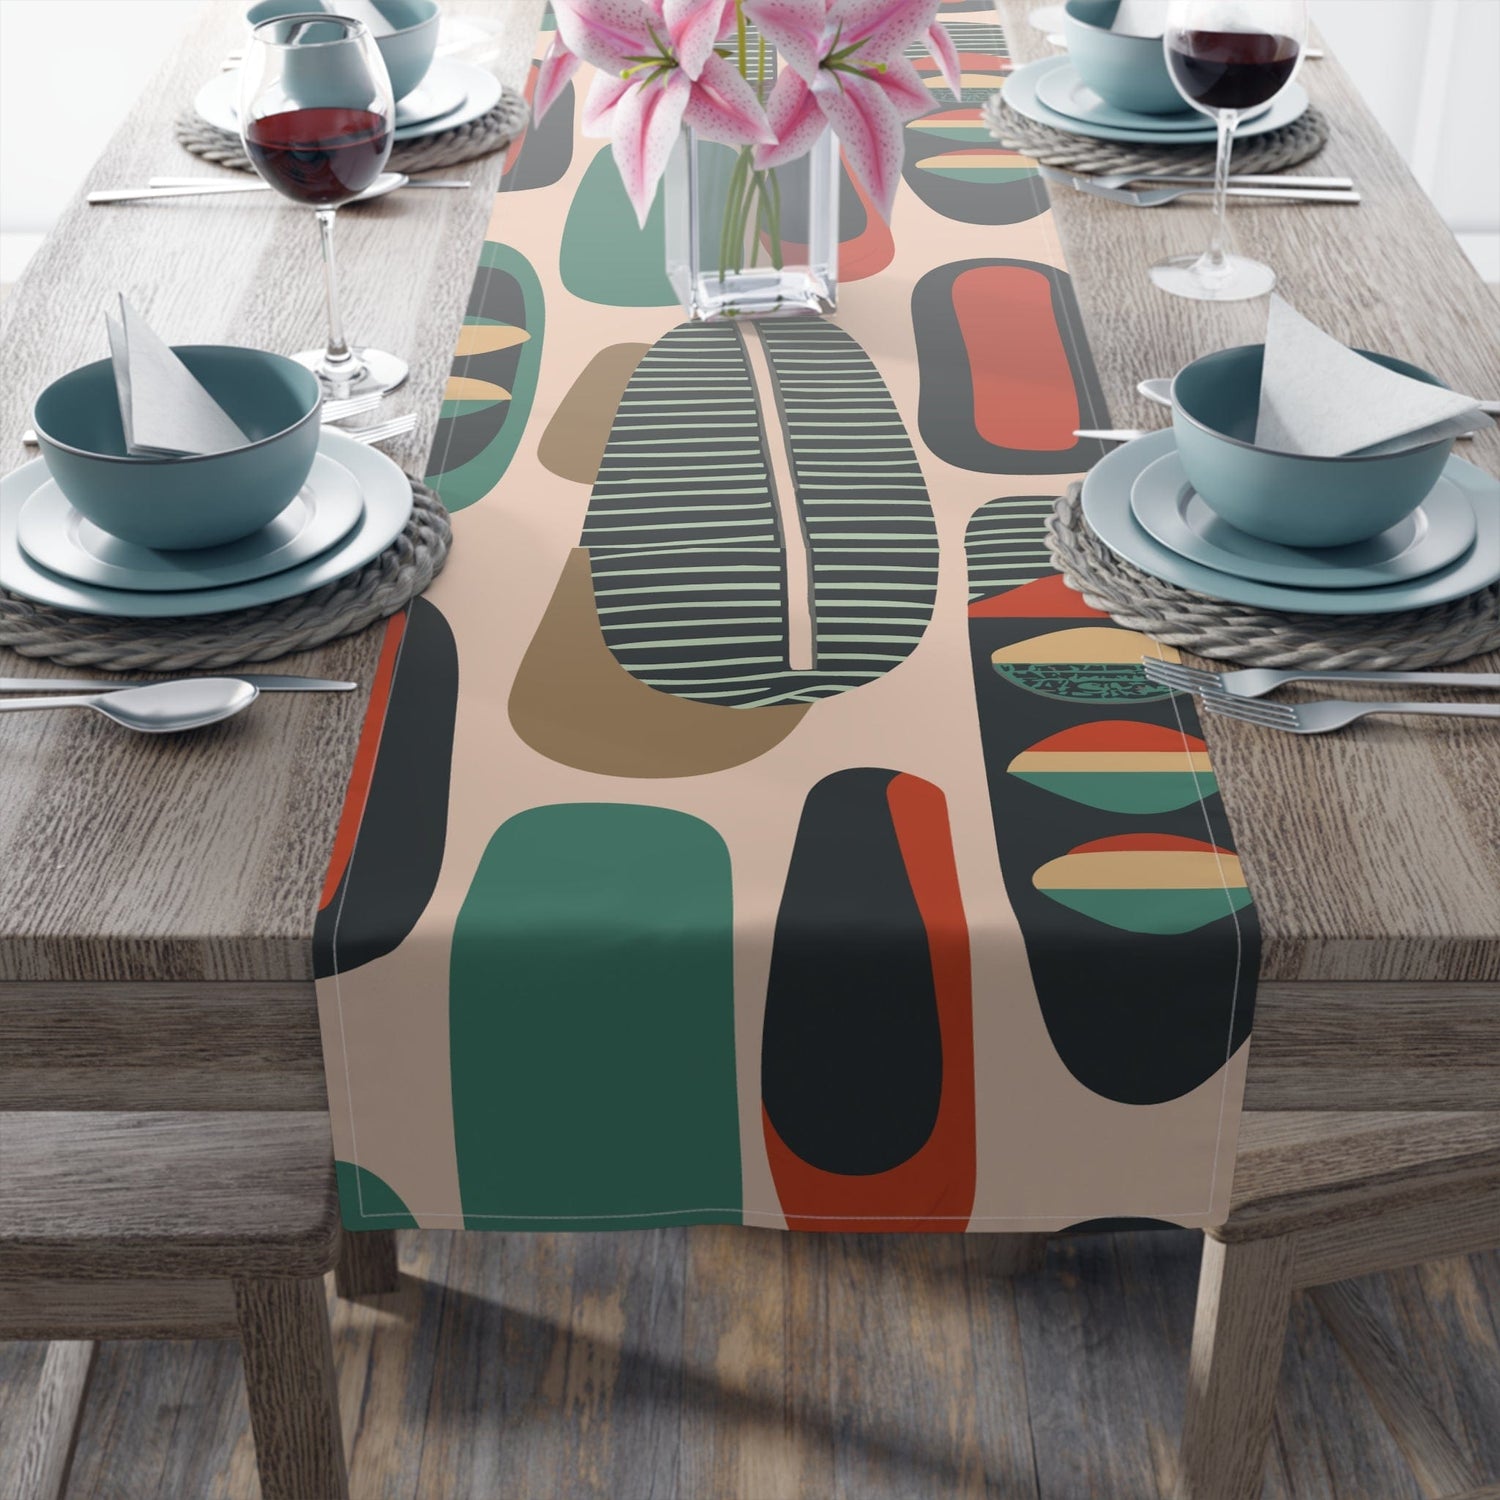 Kate McEnroe New York Retro Mod Table Runner, MCM Geometric Dining Decor, Abstract Shapes Table Linen, Mid Century Modern Table AccessoryTable Runners20993247978682289423